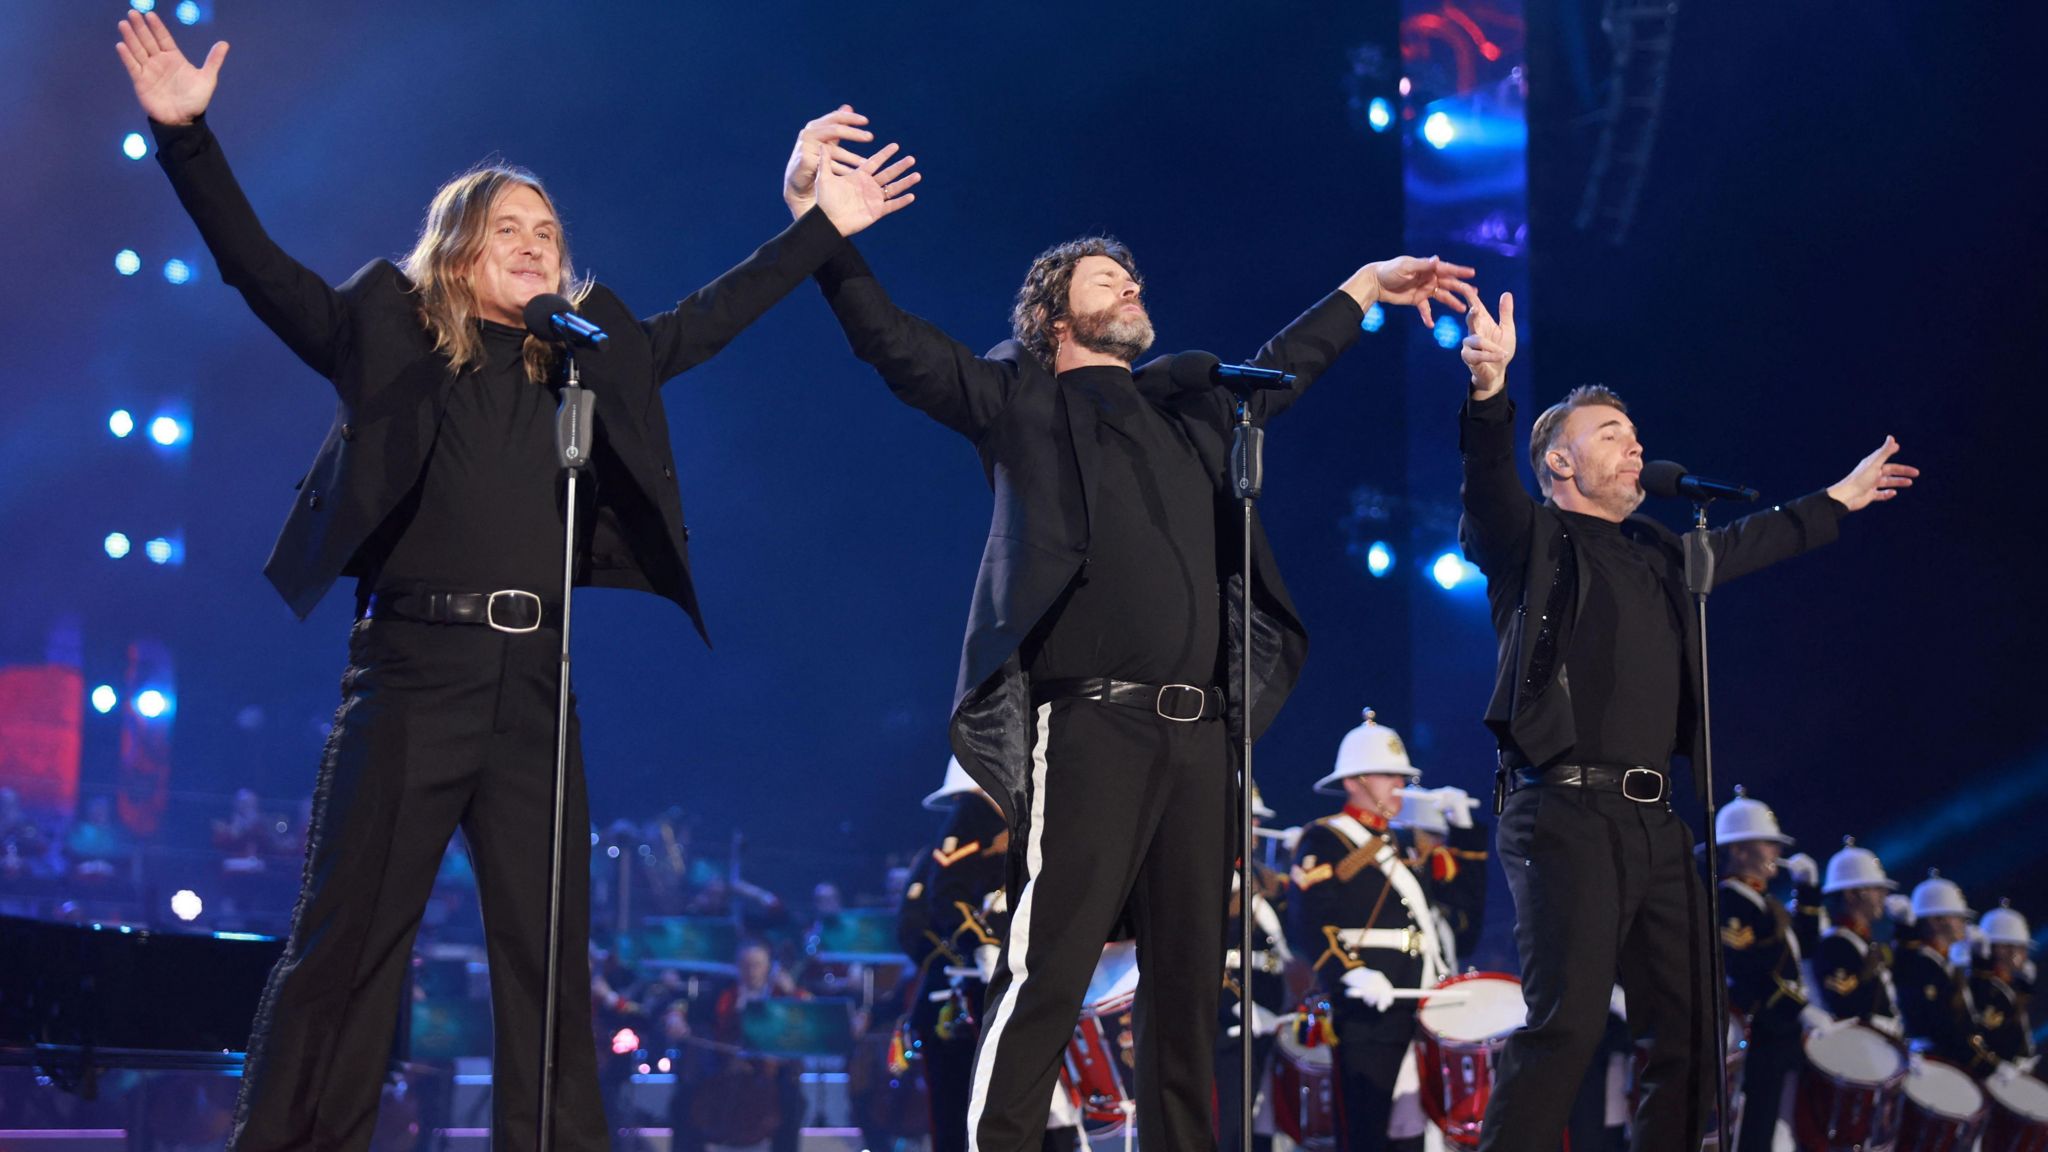 Gary Barlow, Howard Donald and Mark Owen of Take That, all in black, perform on stage during the Coronation Concert in May 2023 in Windsor